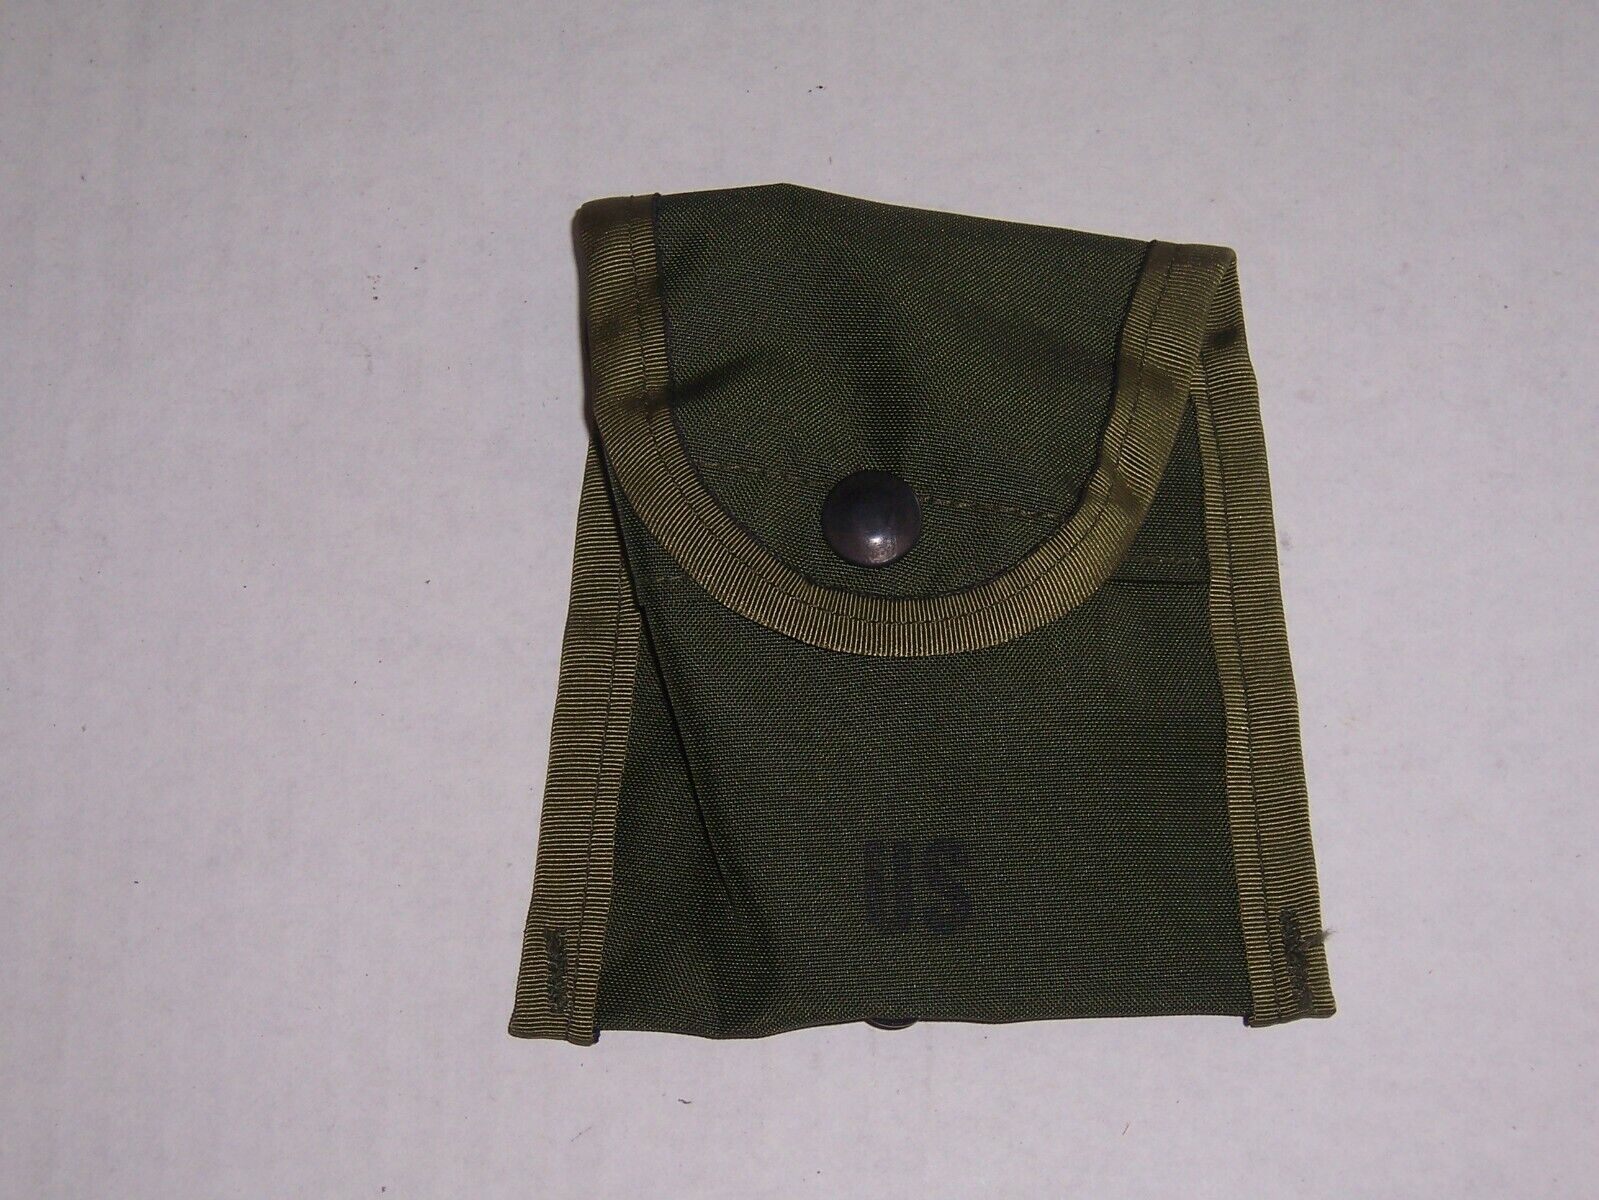 1 New first aid kit / compass pouch genuine u.s. military surplus 